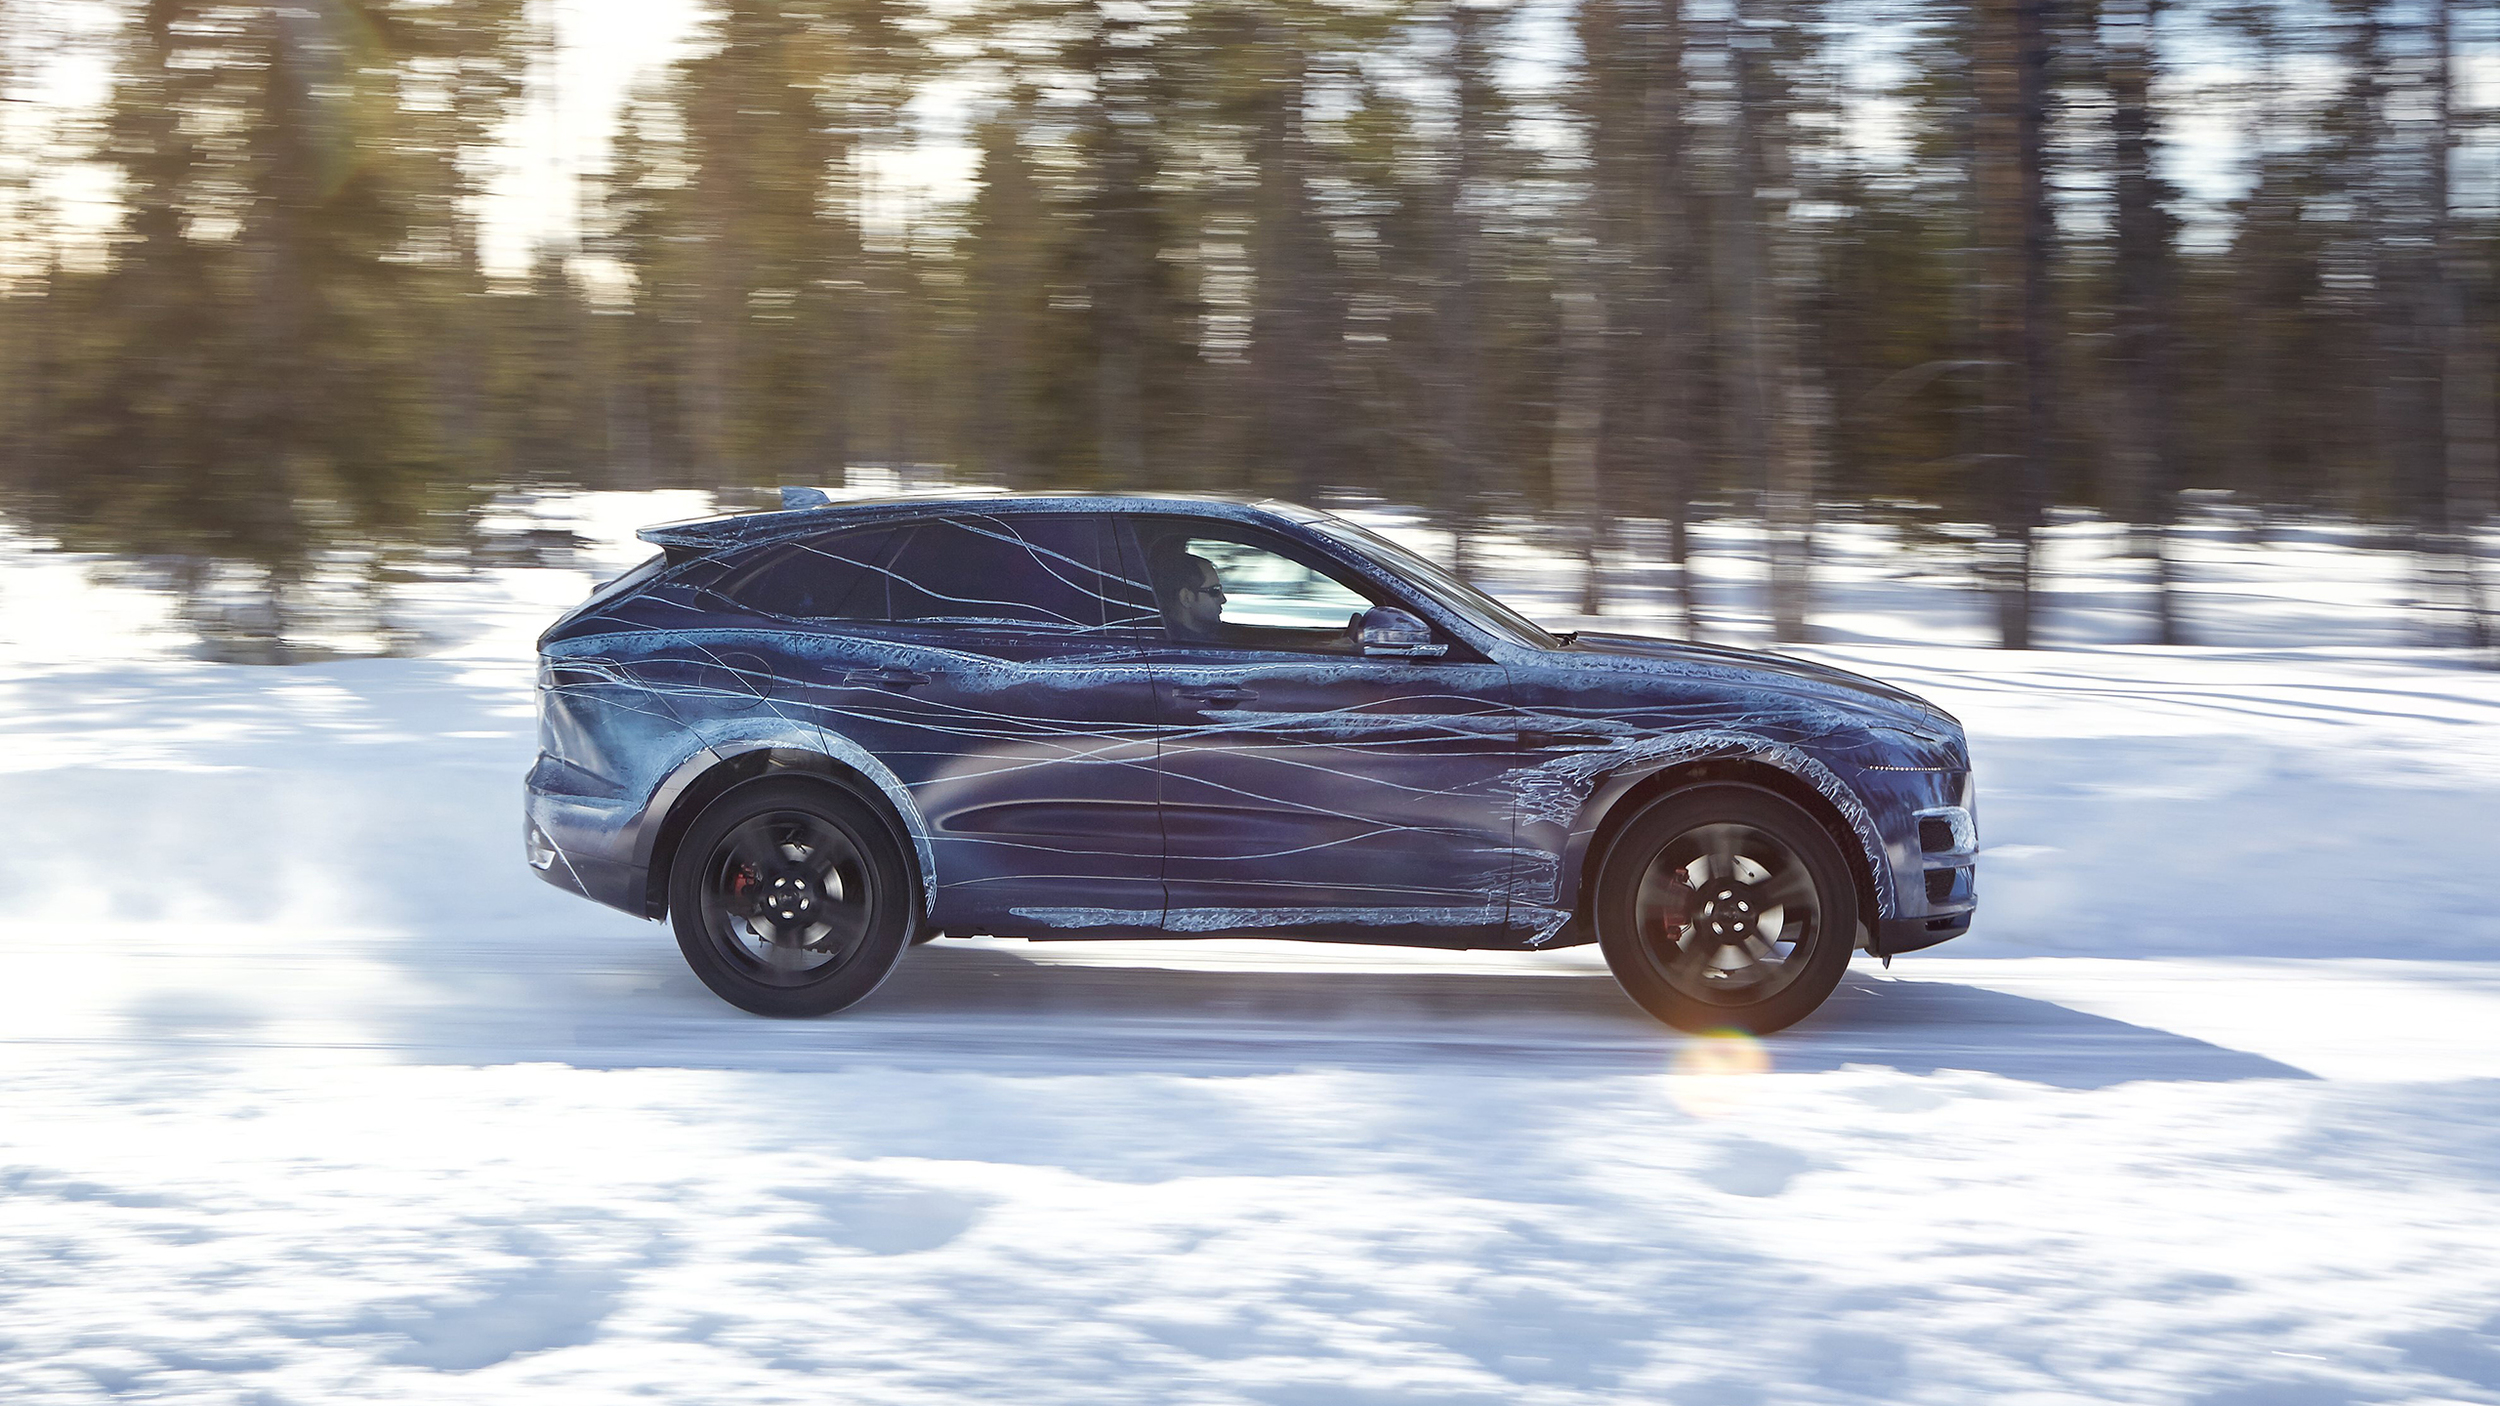 New Jaguar F-Pace tested to the extreme